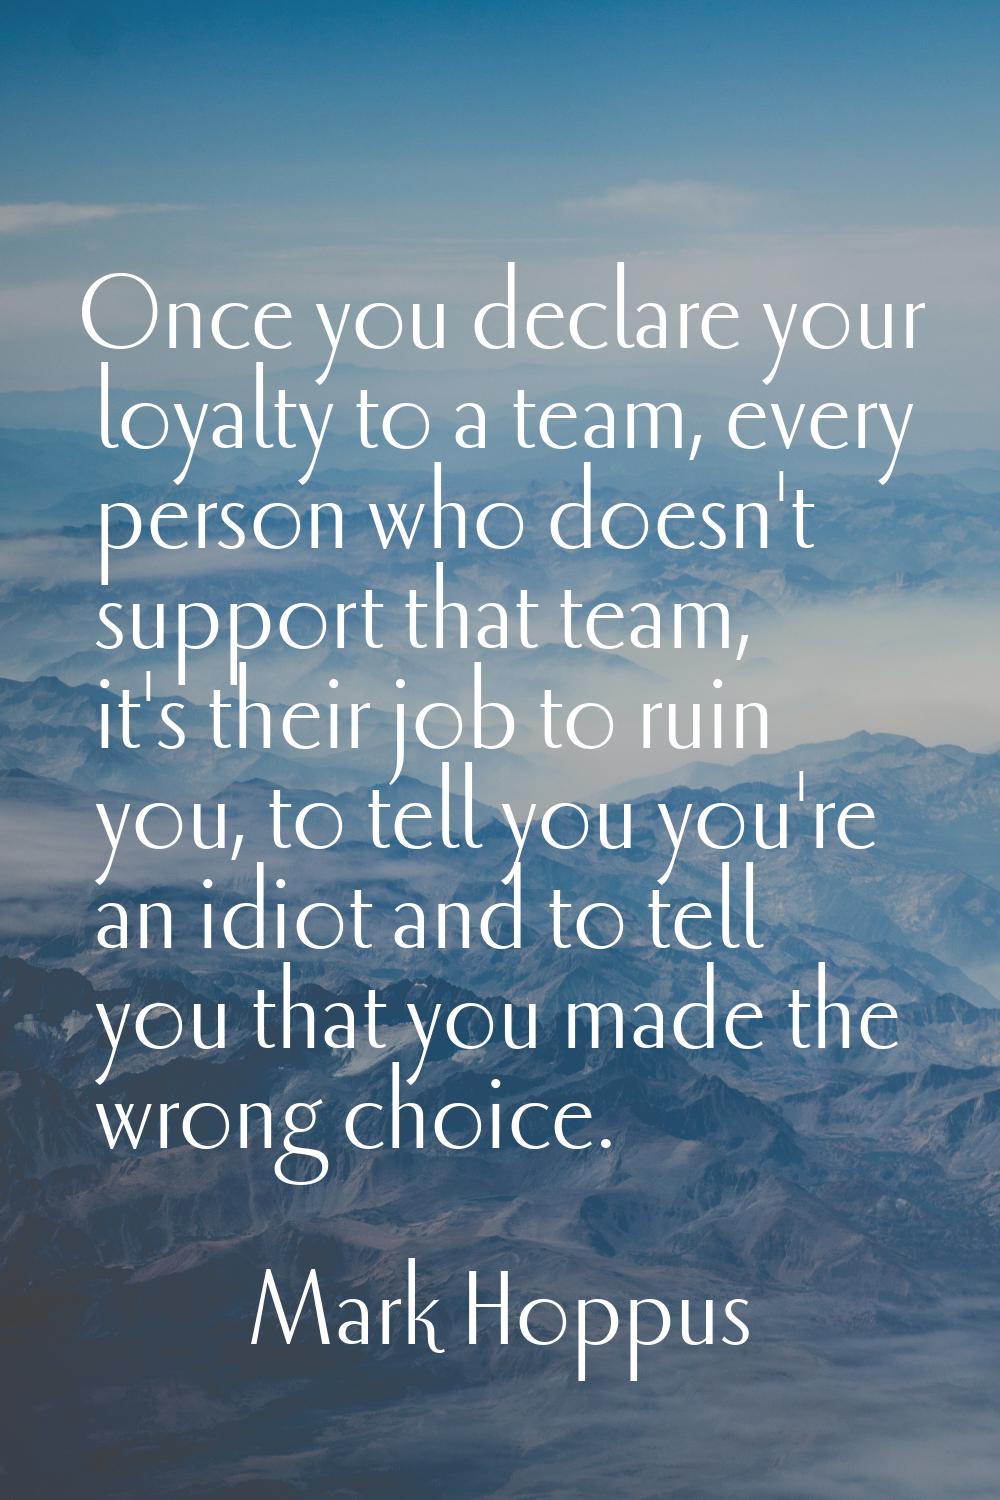 Once you declare your loyalty to a team, every person who doesn't support that team, it's their job